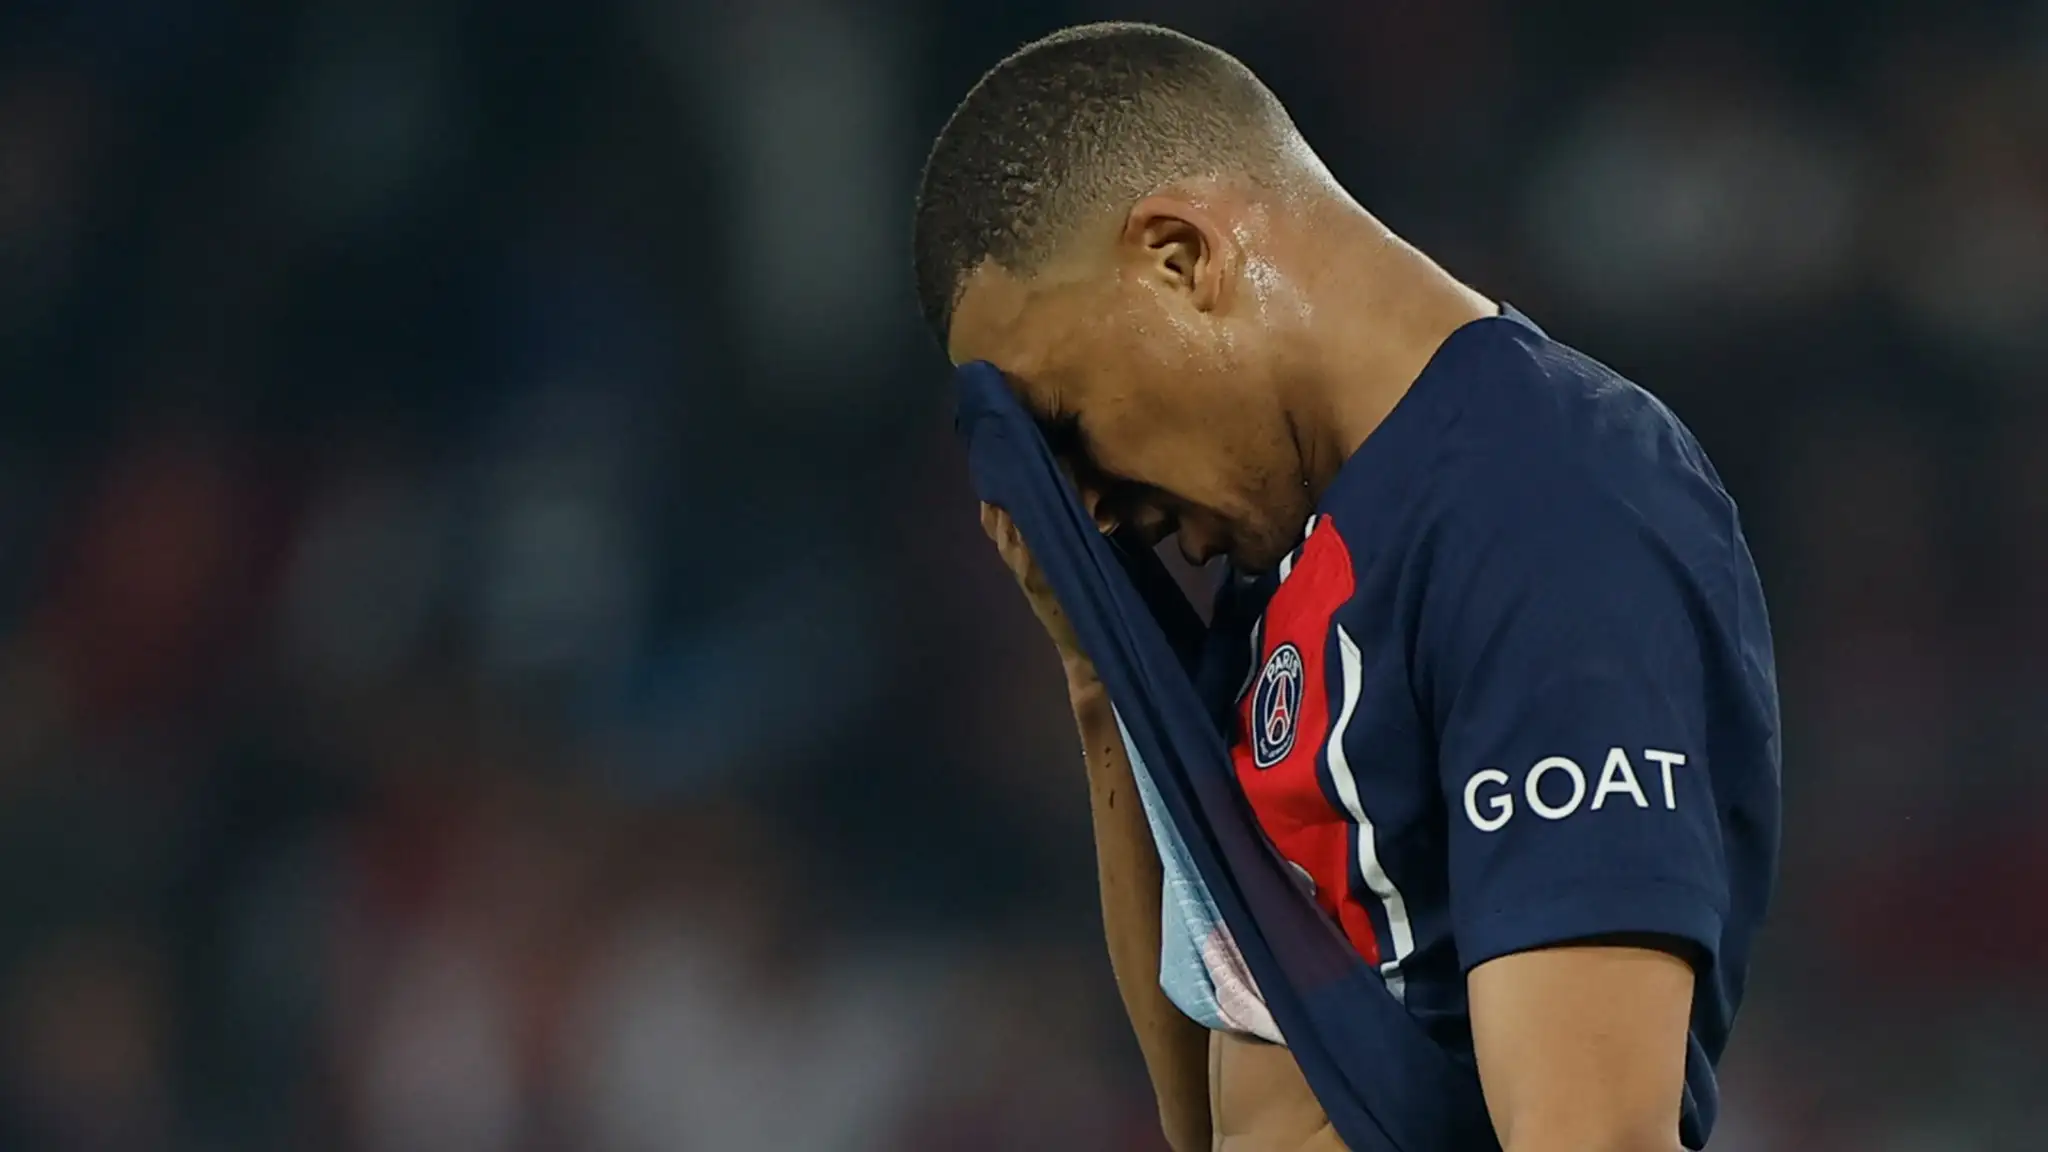 VIDEO: Kylian Mbappe's farewell turns sour! PSG fans BOO outgoing striker after exit announcement as Real Madrid switch looms